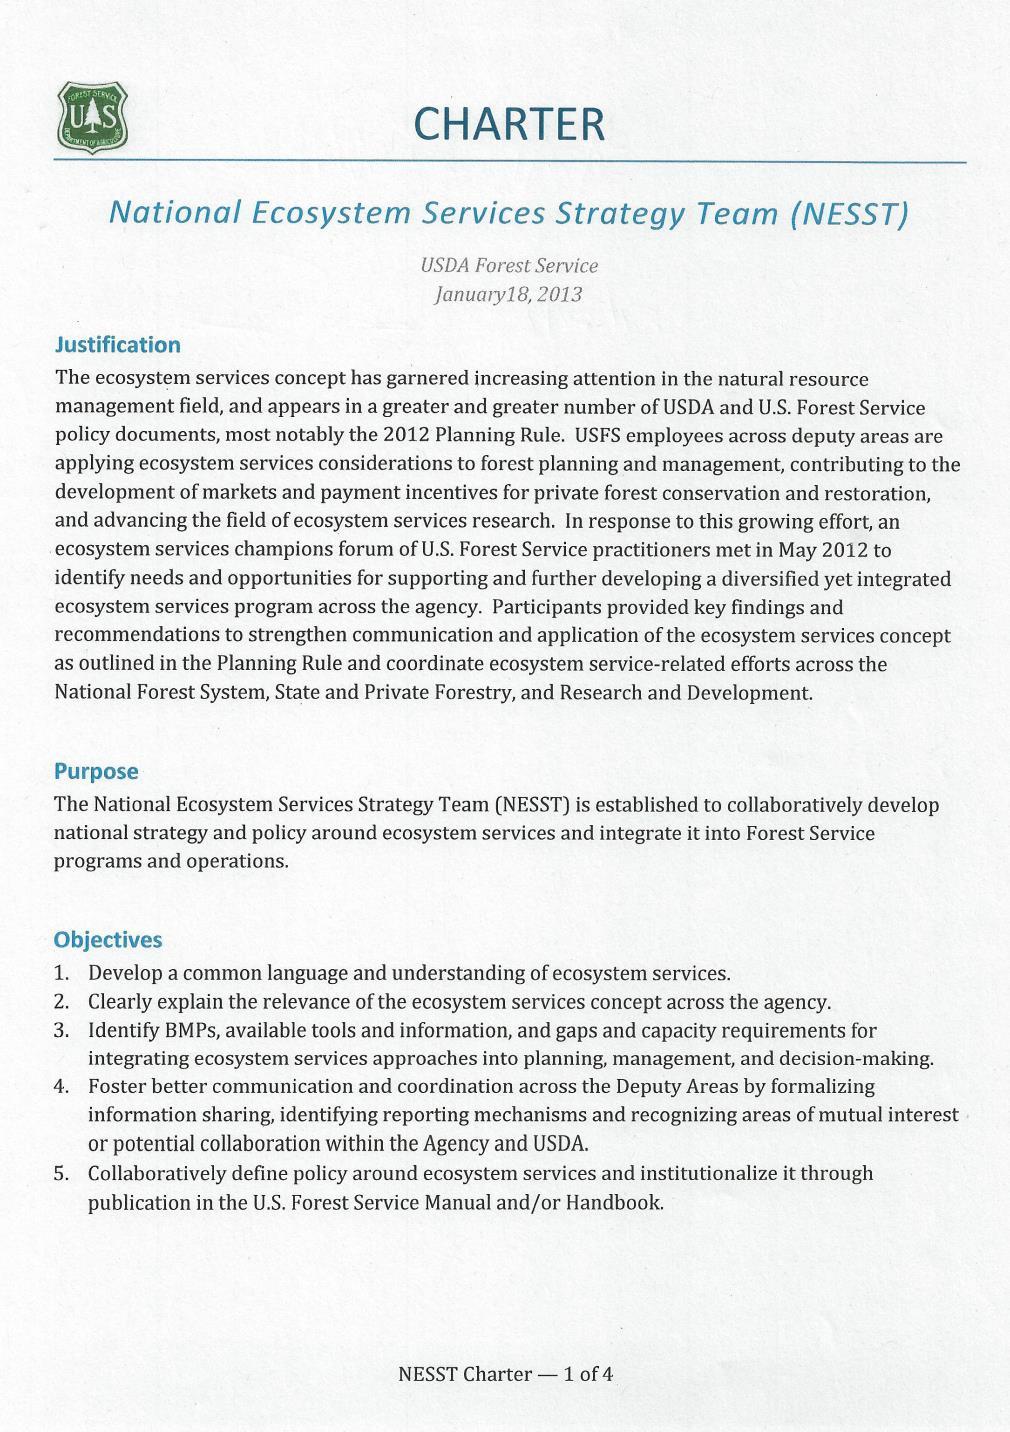 National Ecosystem Services Strategy Team (NESST) Established to collaboratively develop national strategy